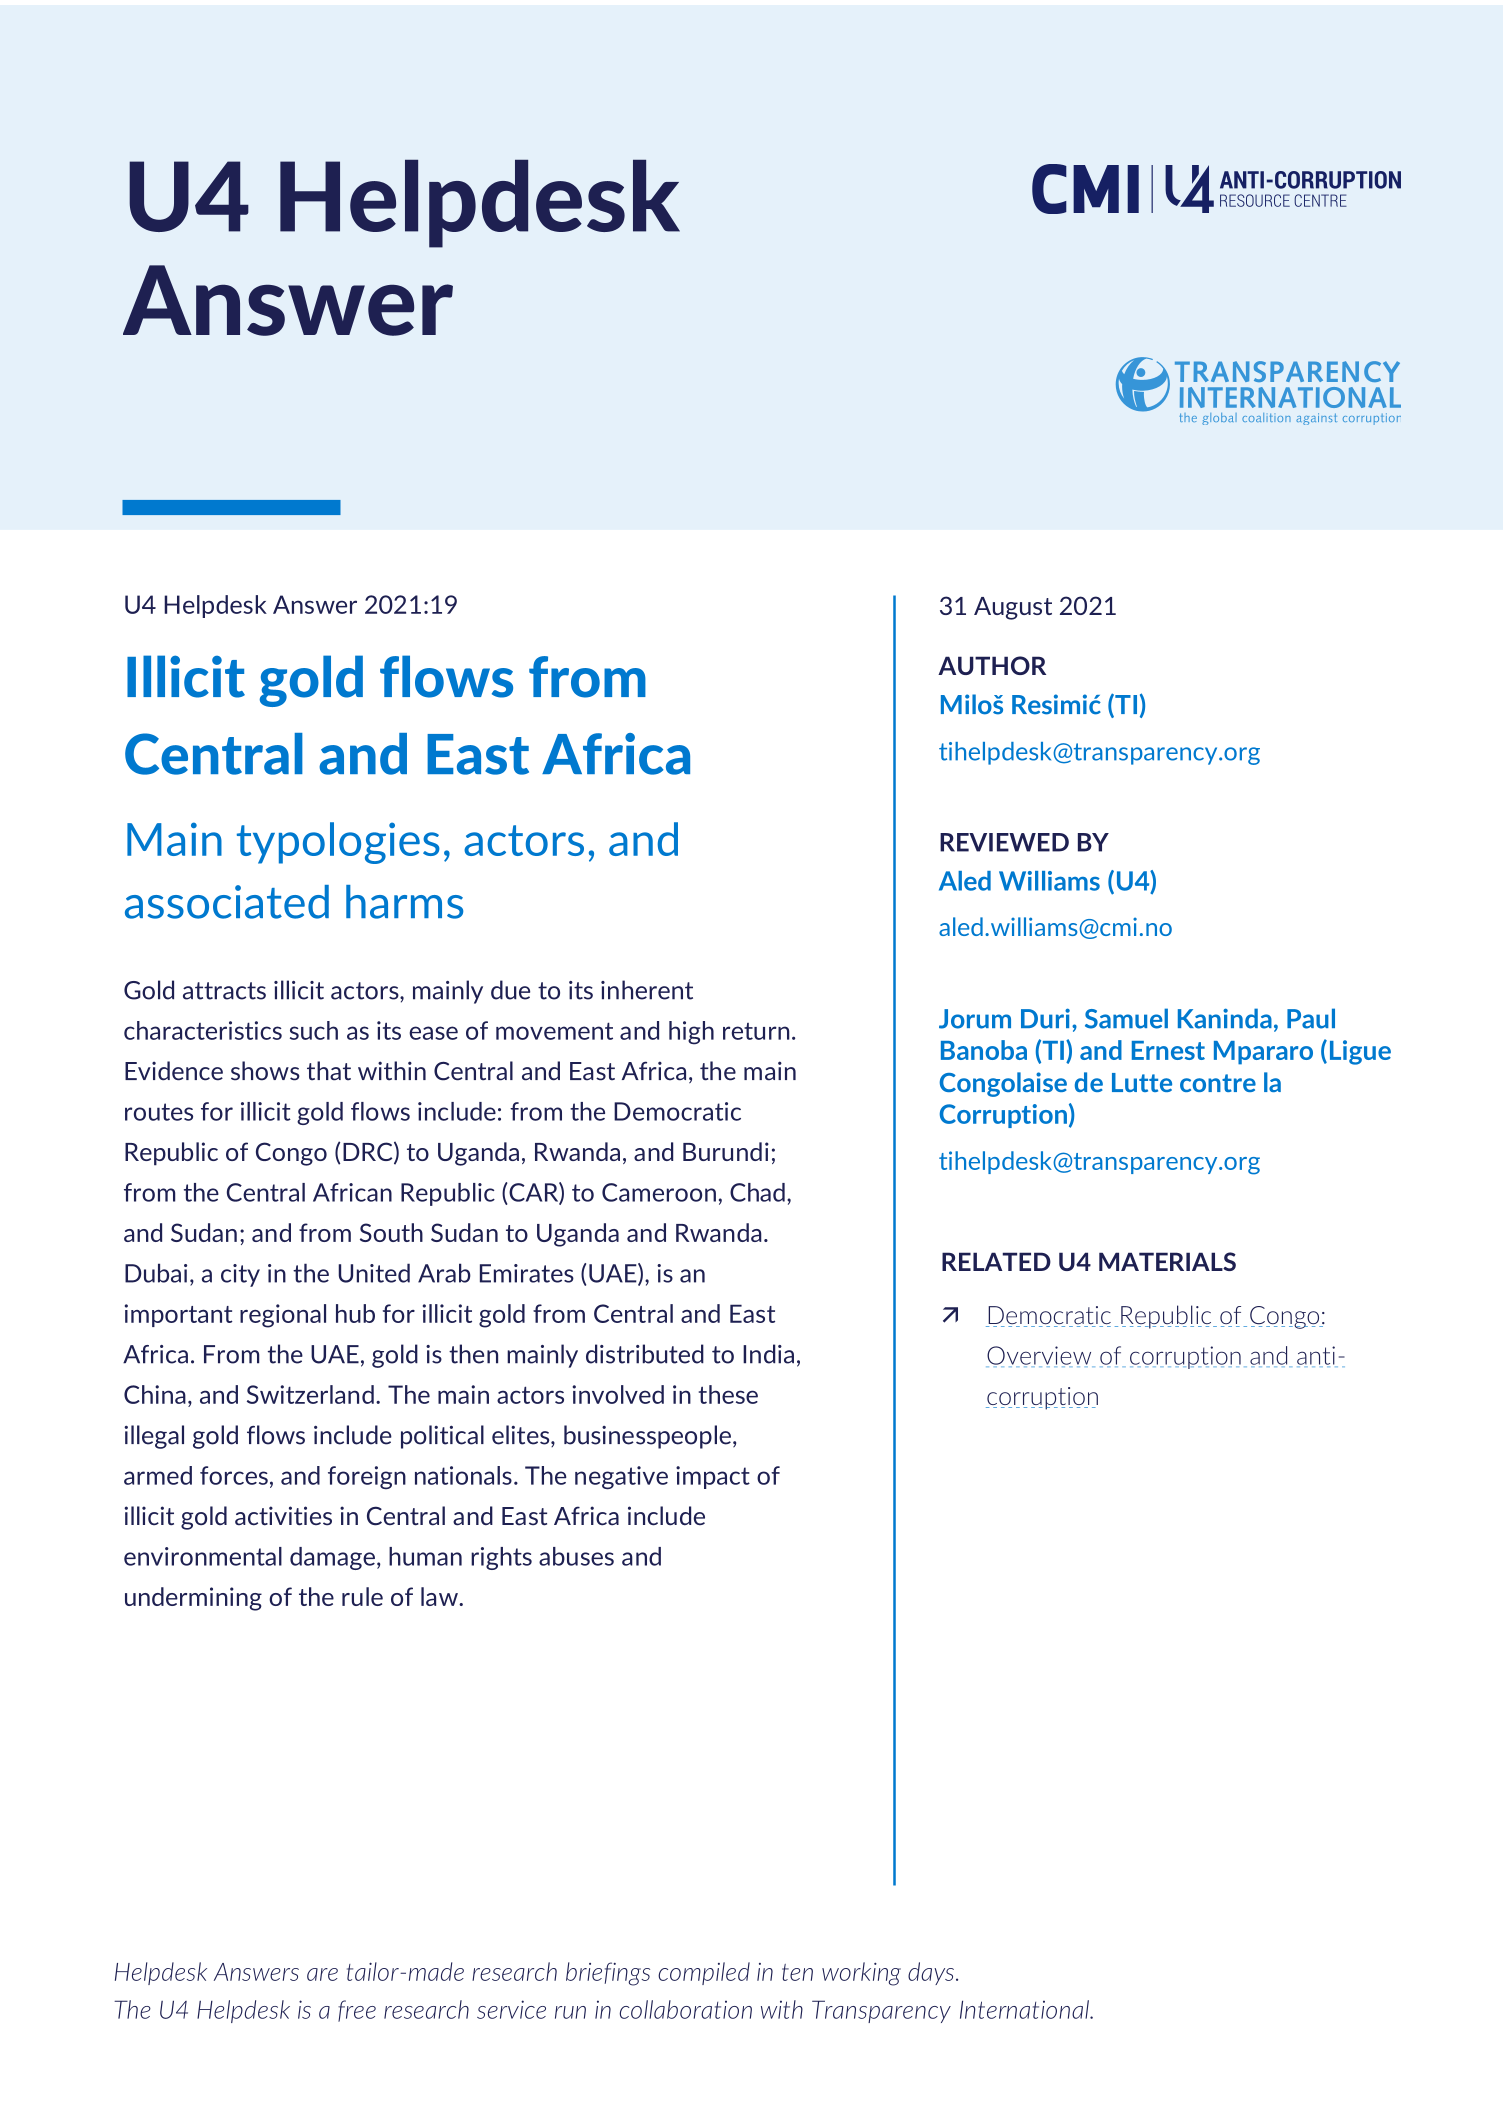 Illicit gold flows from Central and East Africa